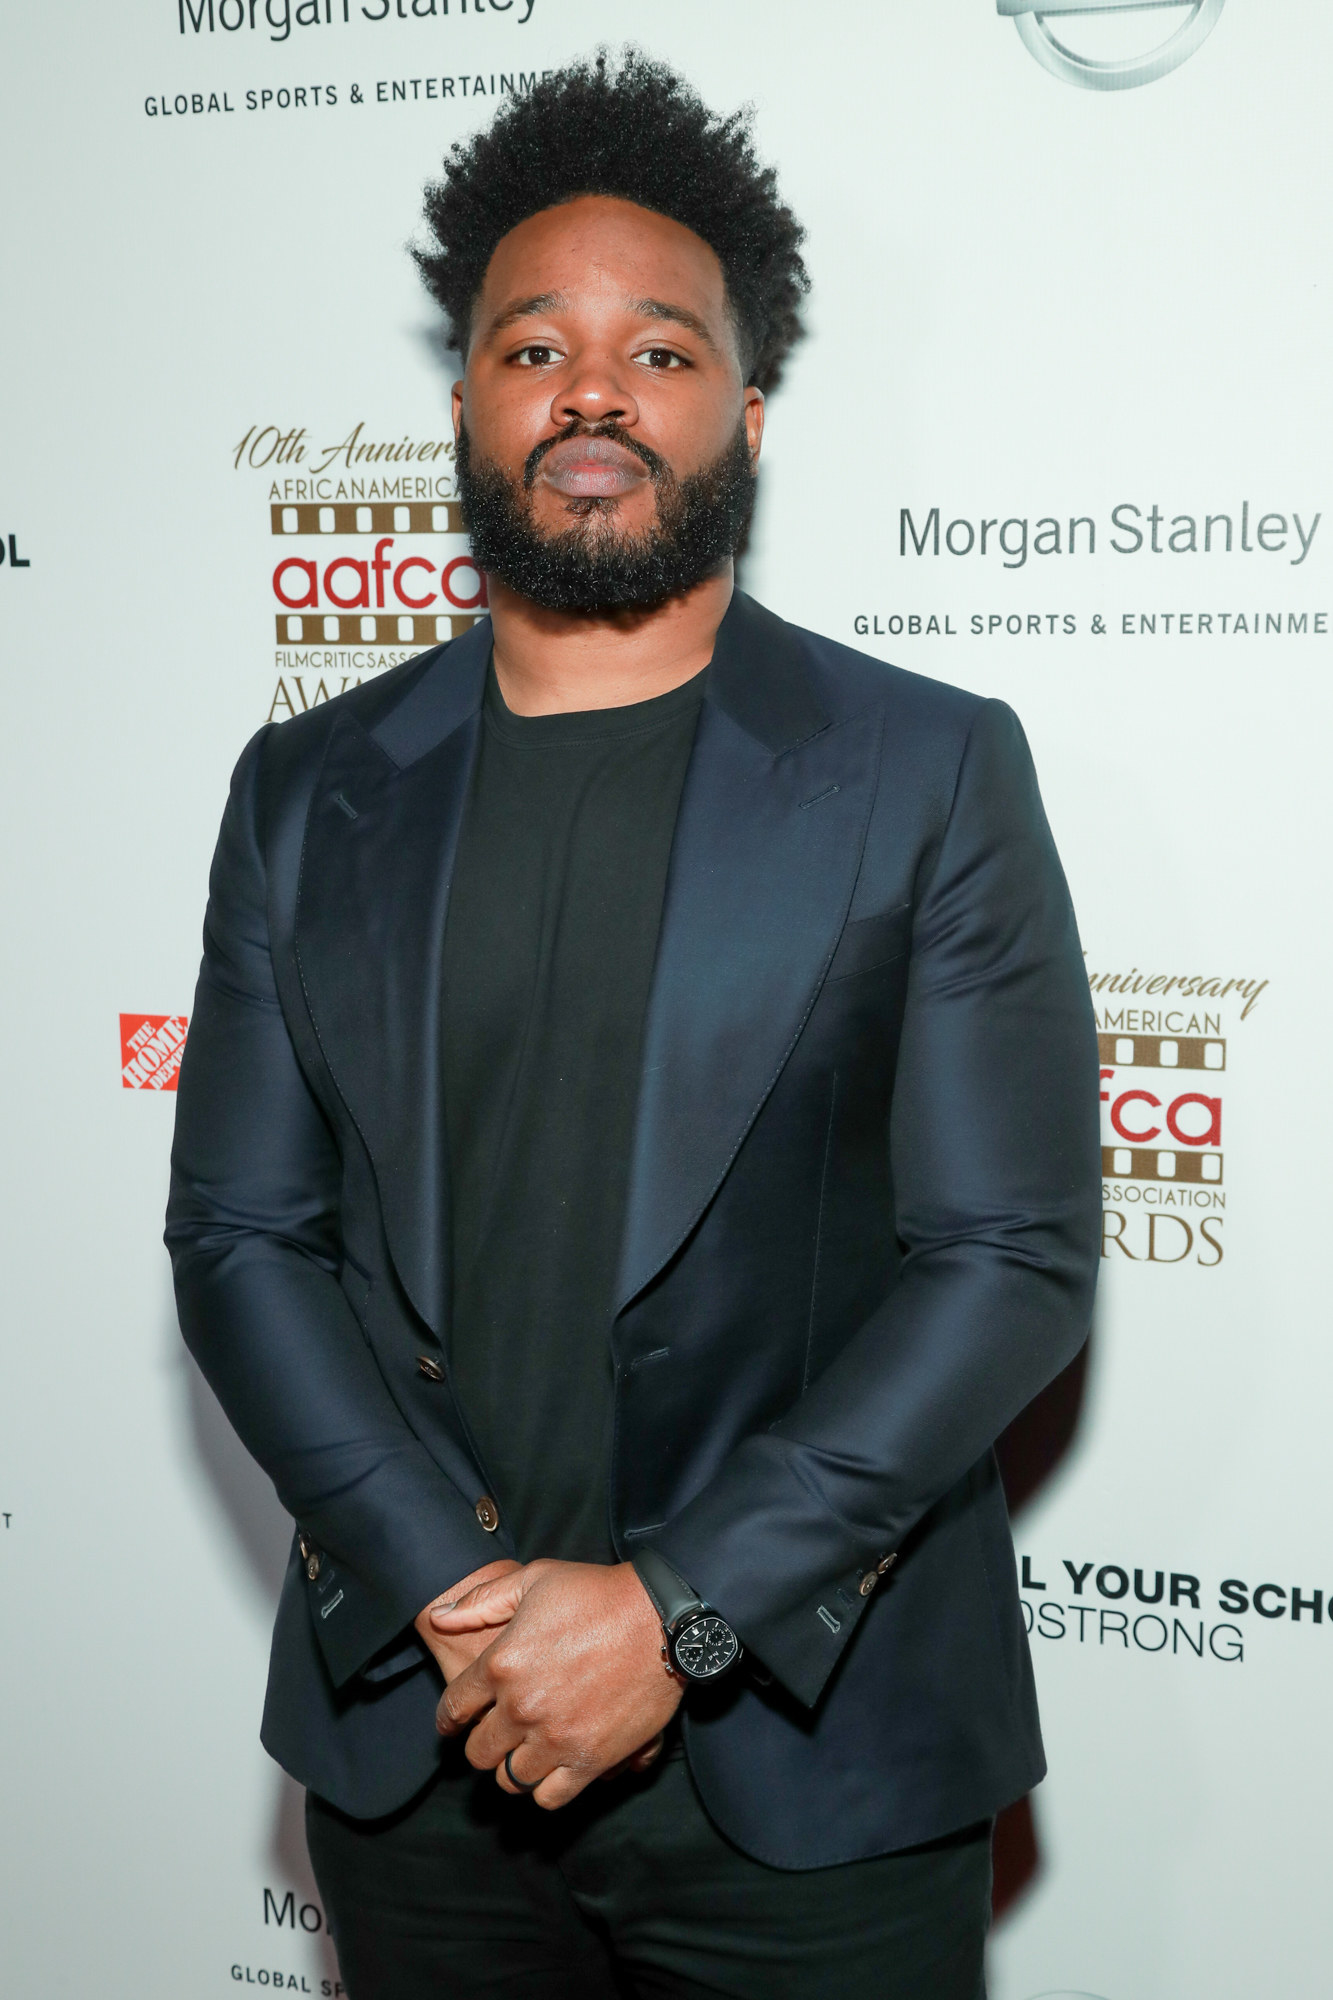 Ryan Coogler at the 10th Annual AAFCA Awards on February 06, 2019